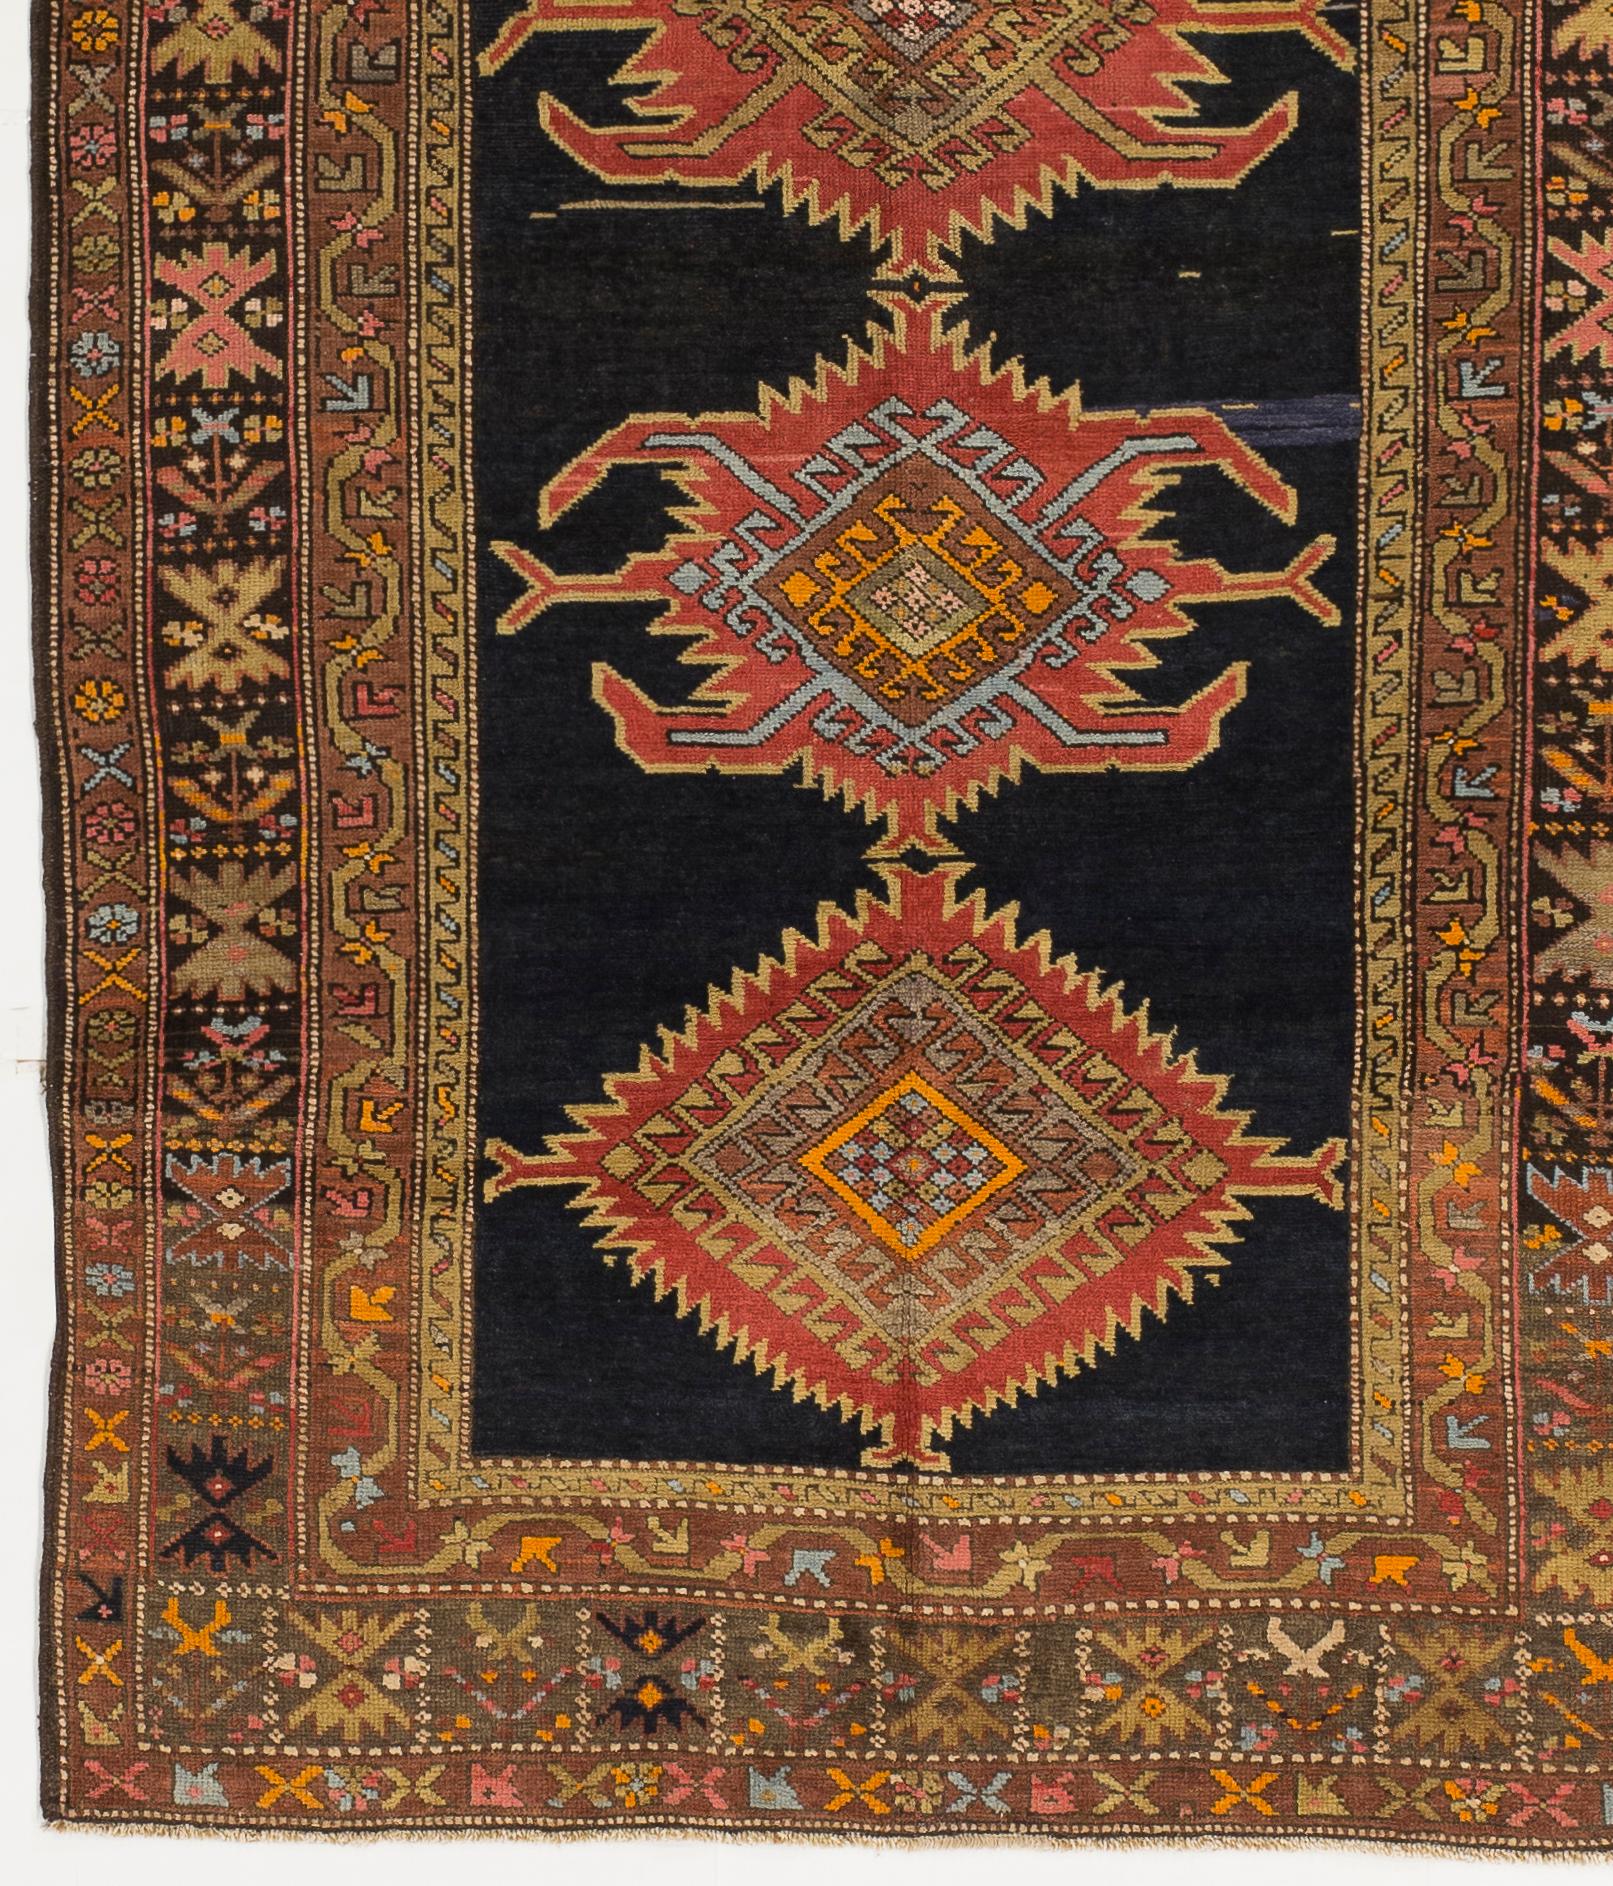 Wool Mid-20th Century Hand-Woven Russian Tribal Rug Kazak Design For Sale